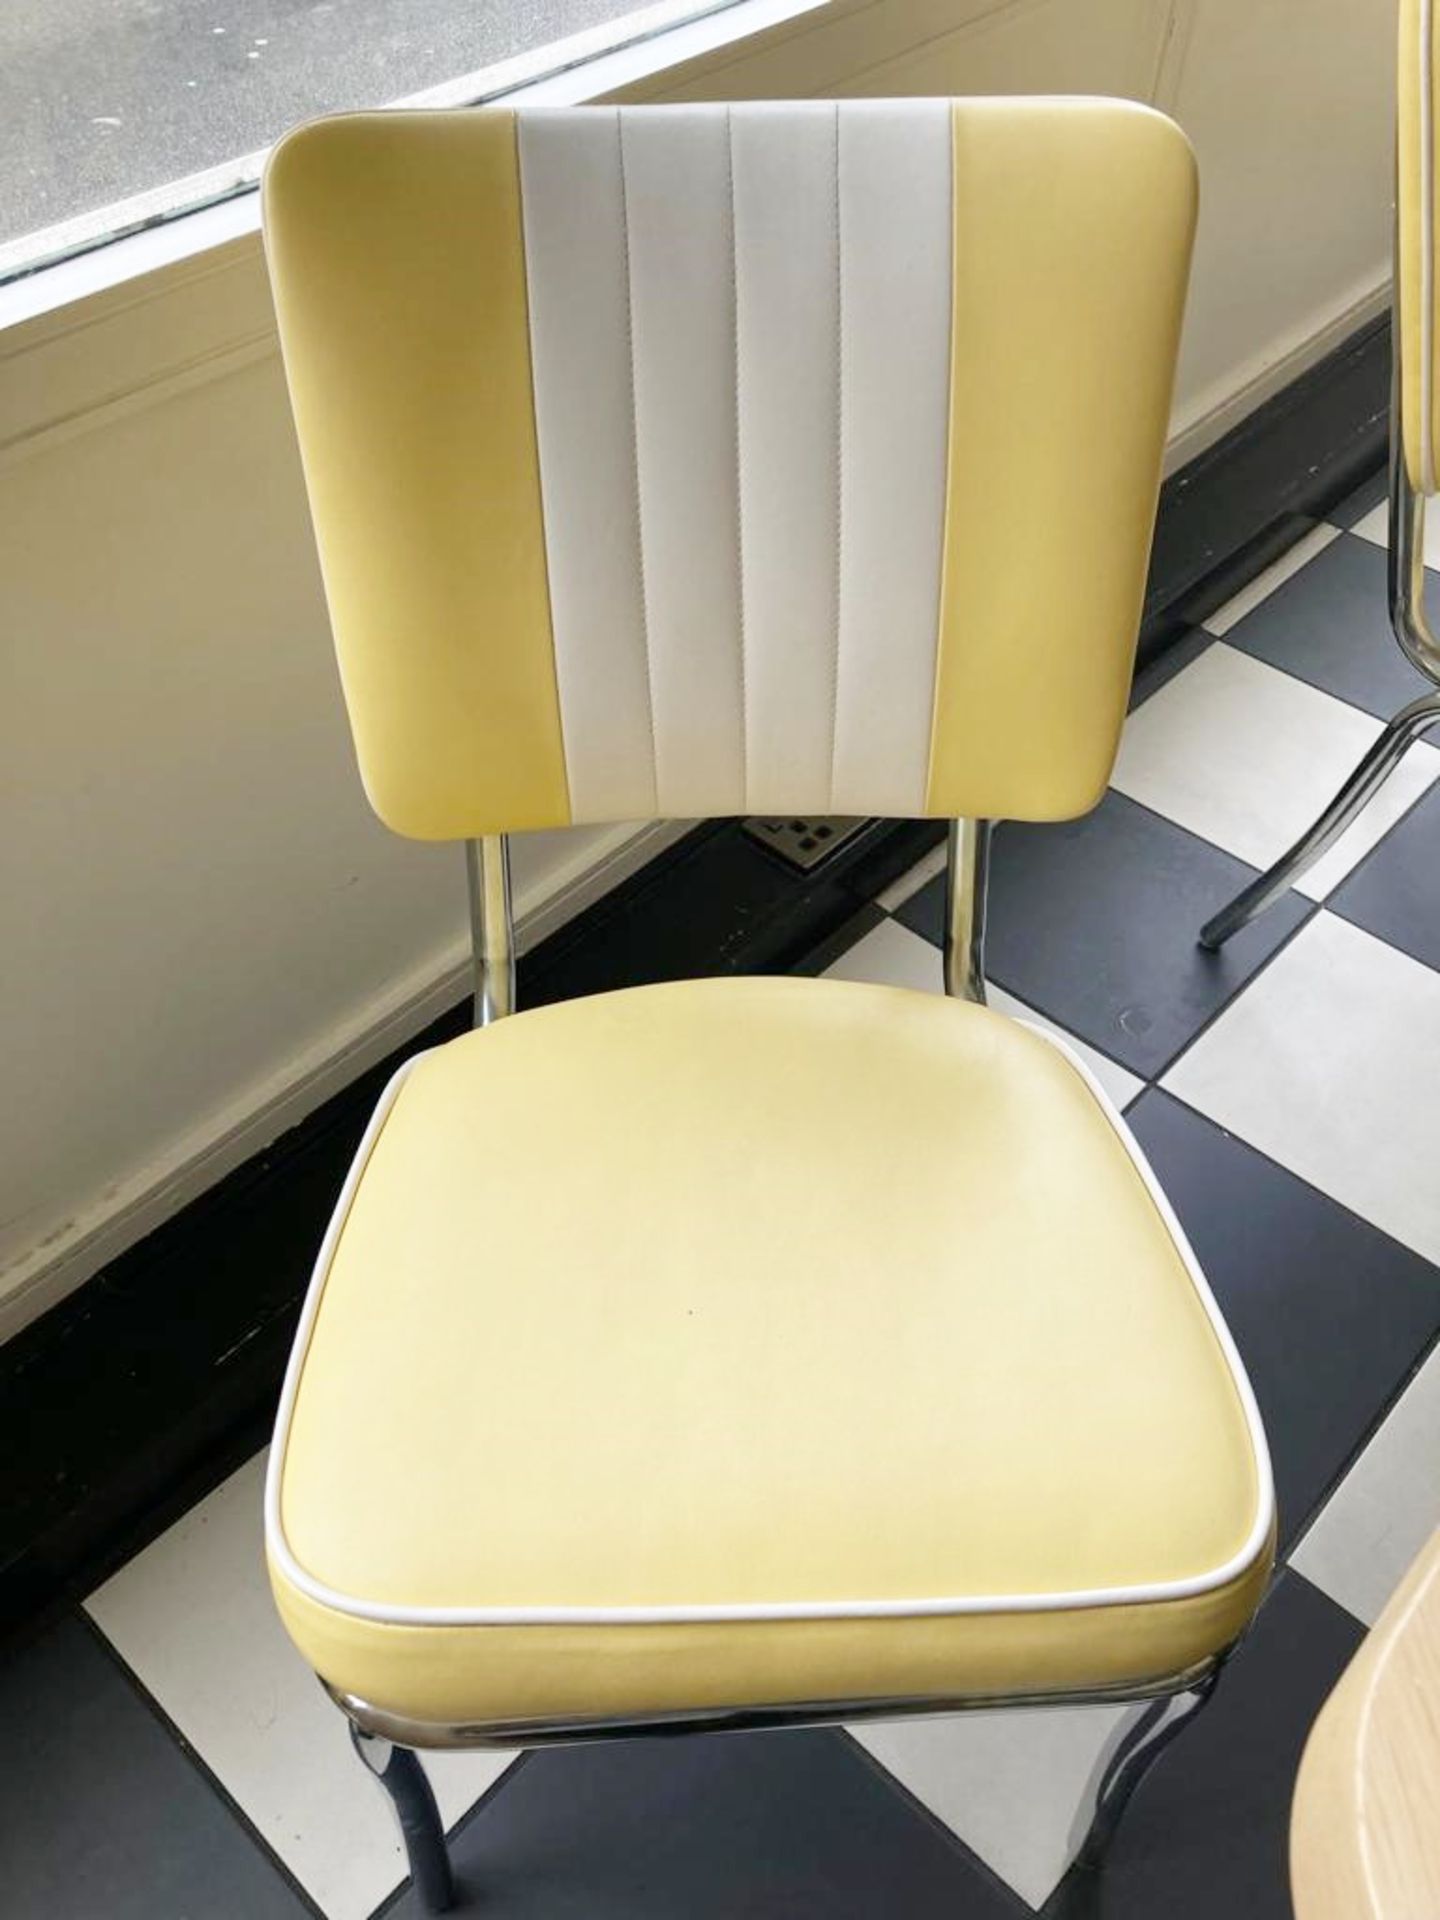 8 x Restaurant Dining Chairs With Chrome Bases and Faux Leather Upholstery Finished in Lemon and - Image 4 of 7